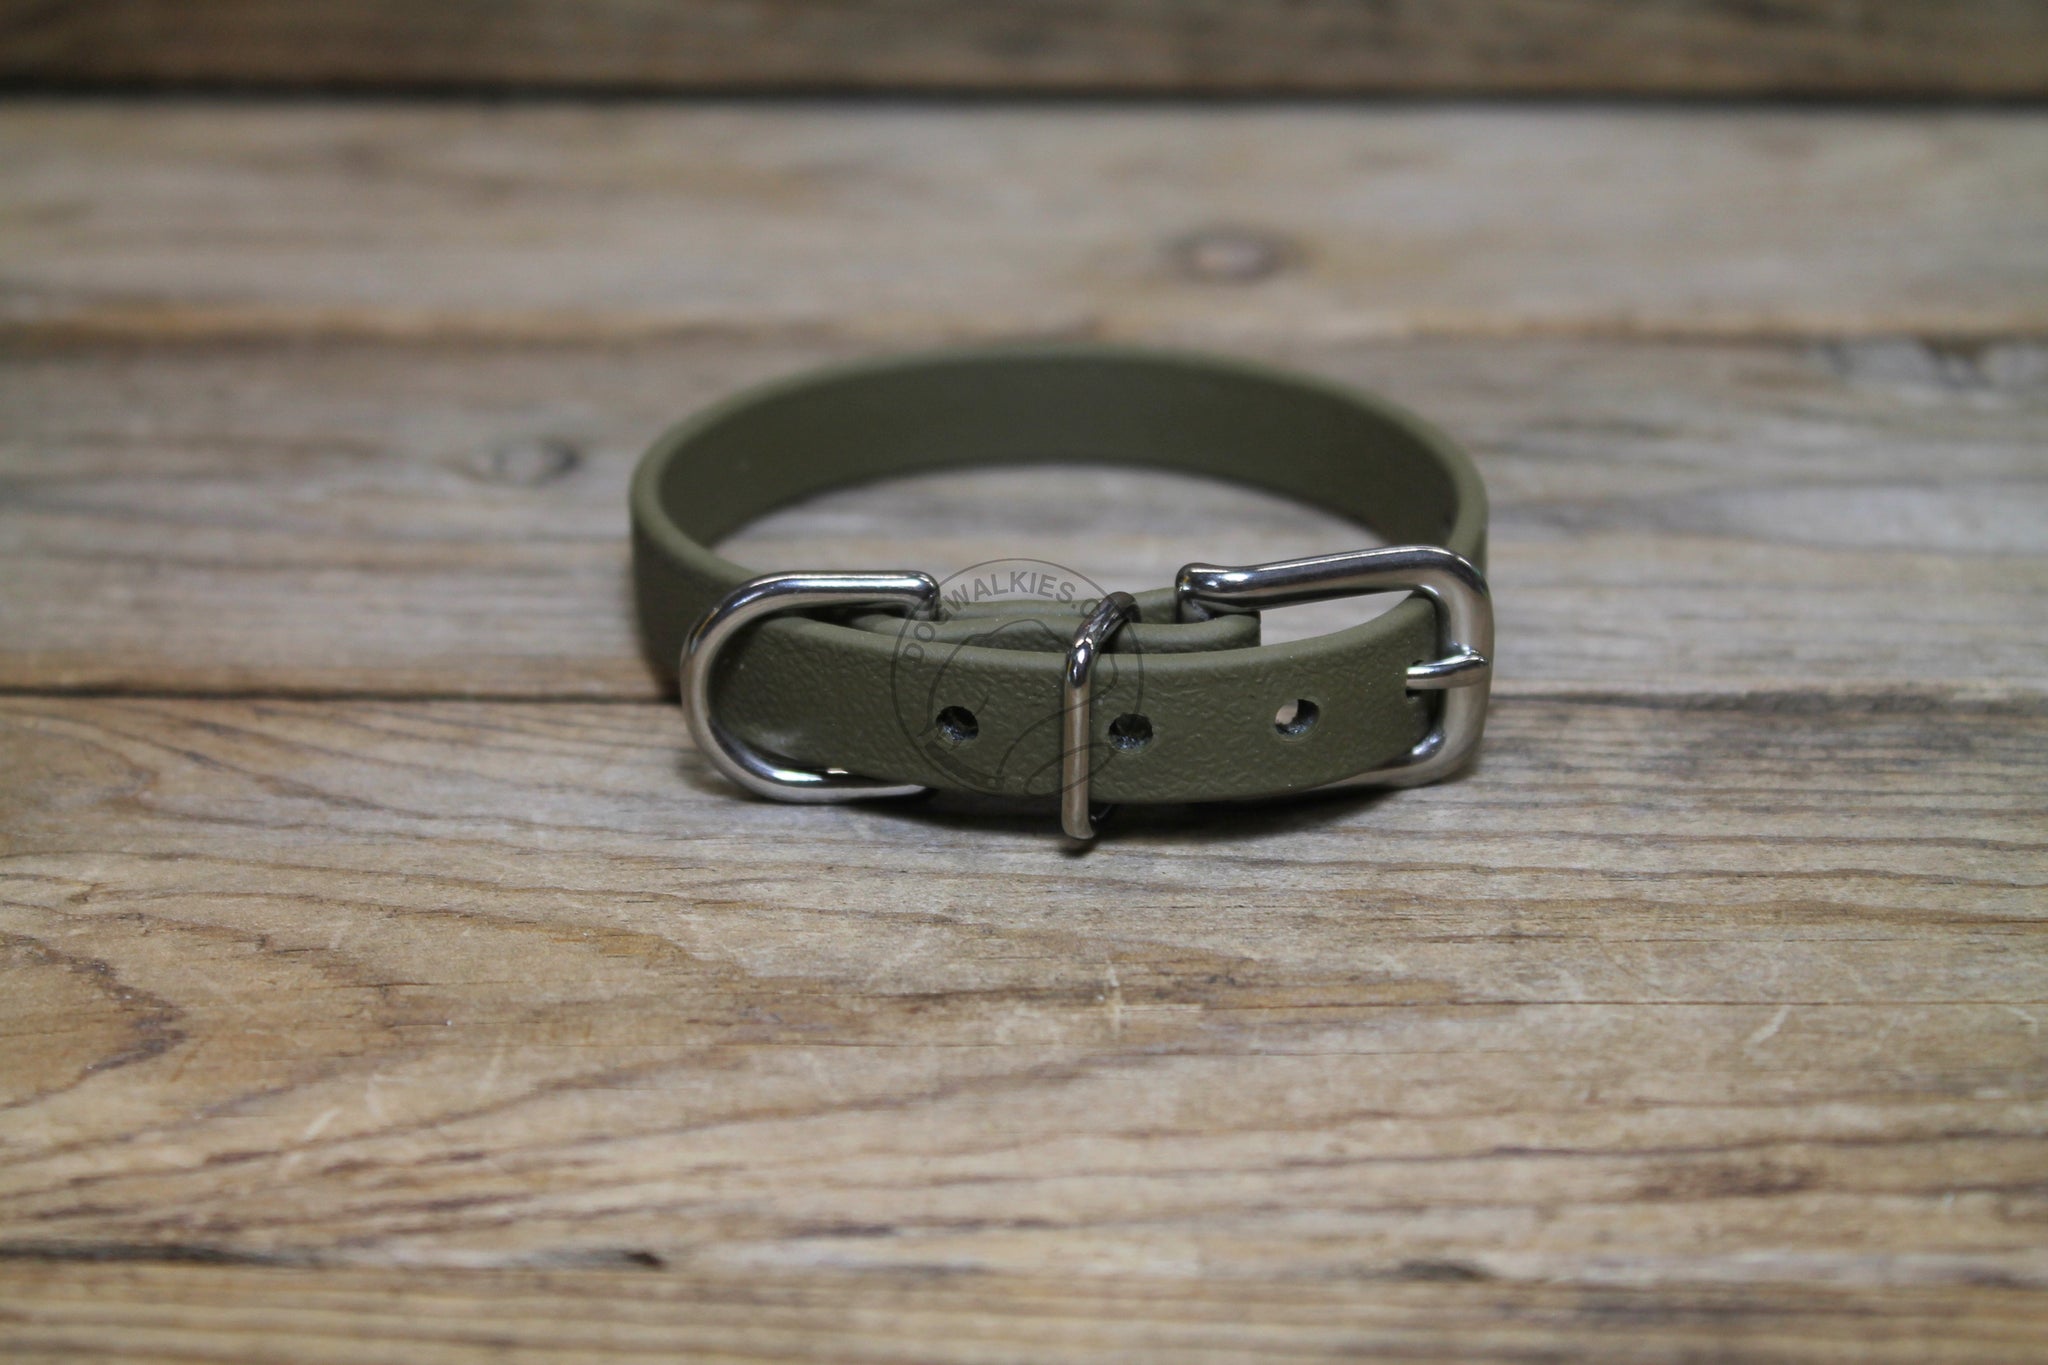 Olive Green Biothane Small Dog Collar - 1/2" (12mm) wide